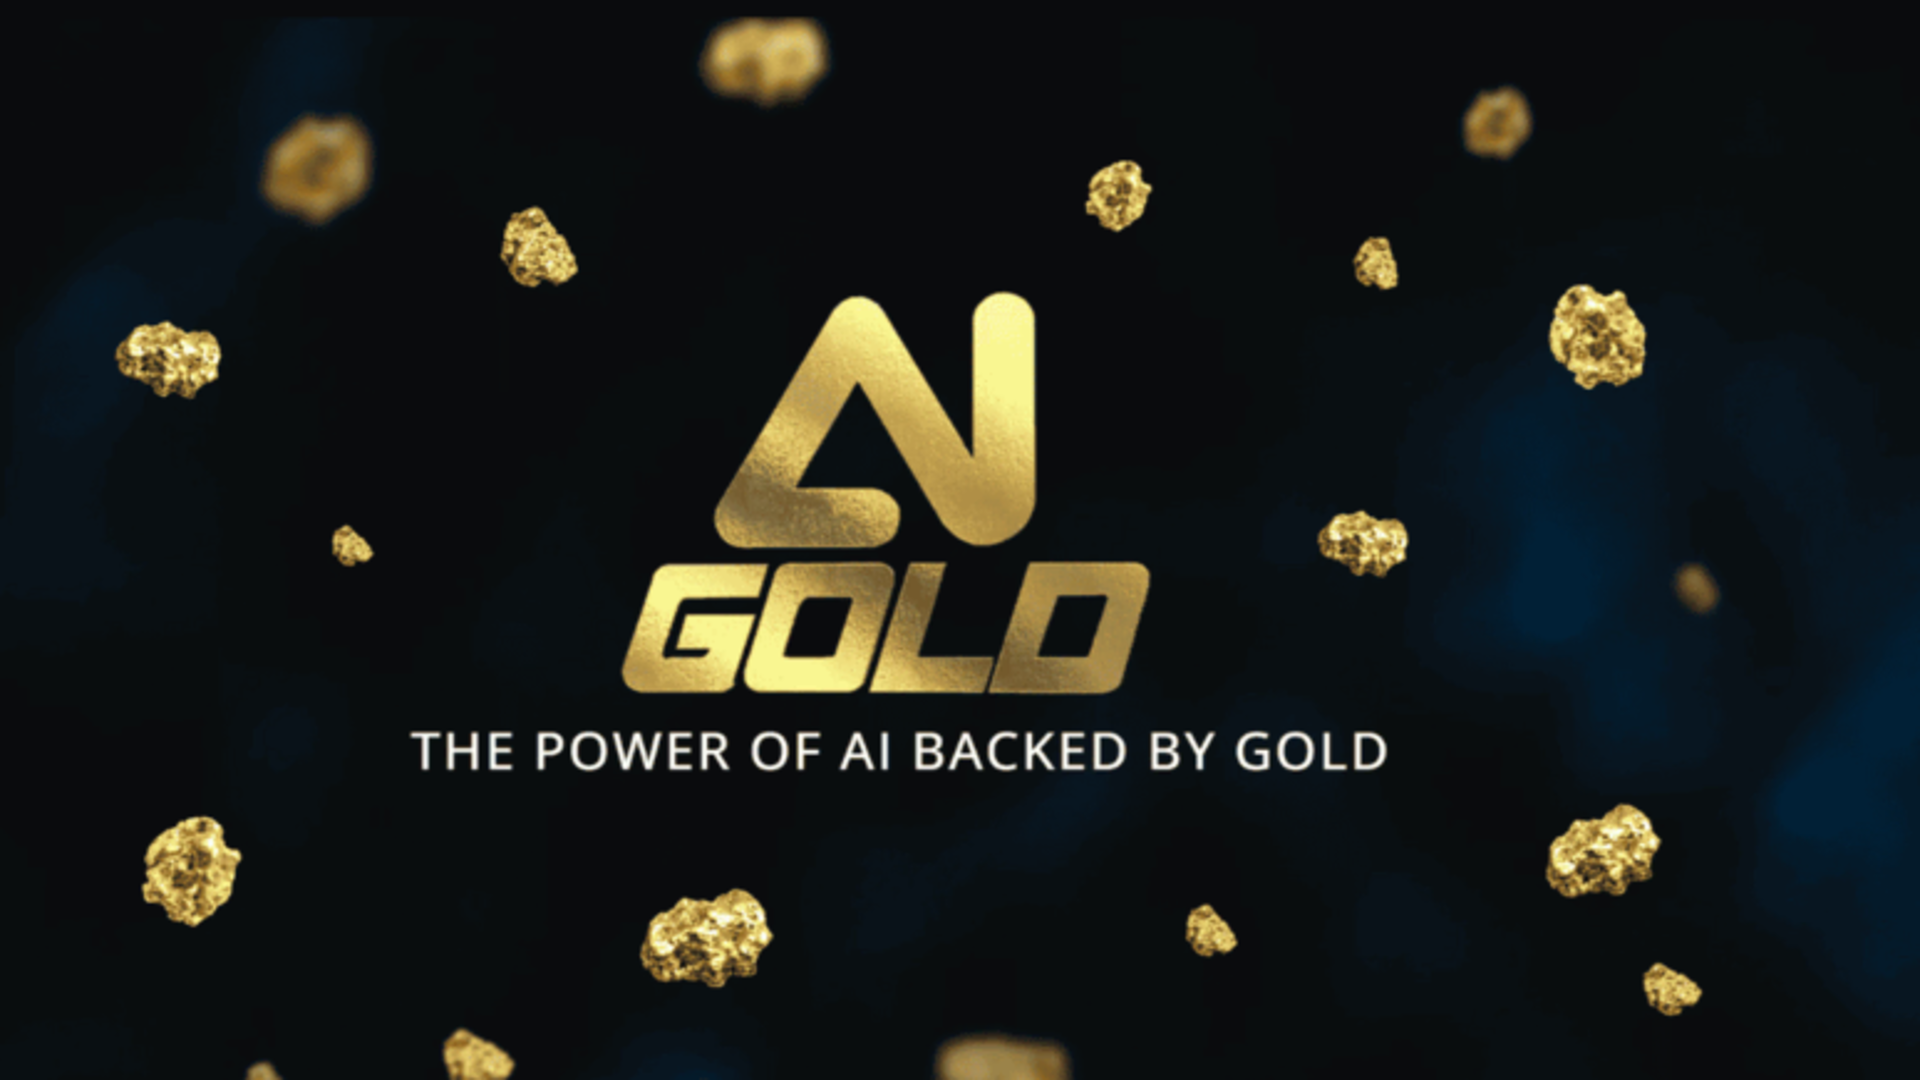 A Guide to Buy, Sell, Trade, and Redeem Digital Gold Token AIGold